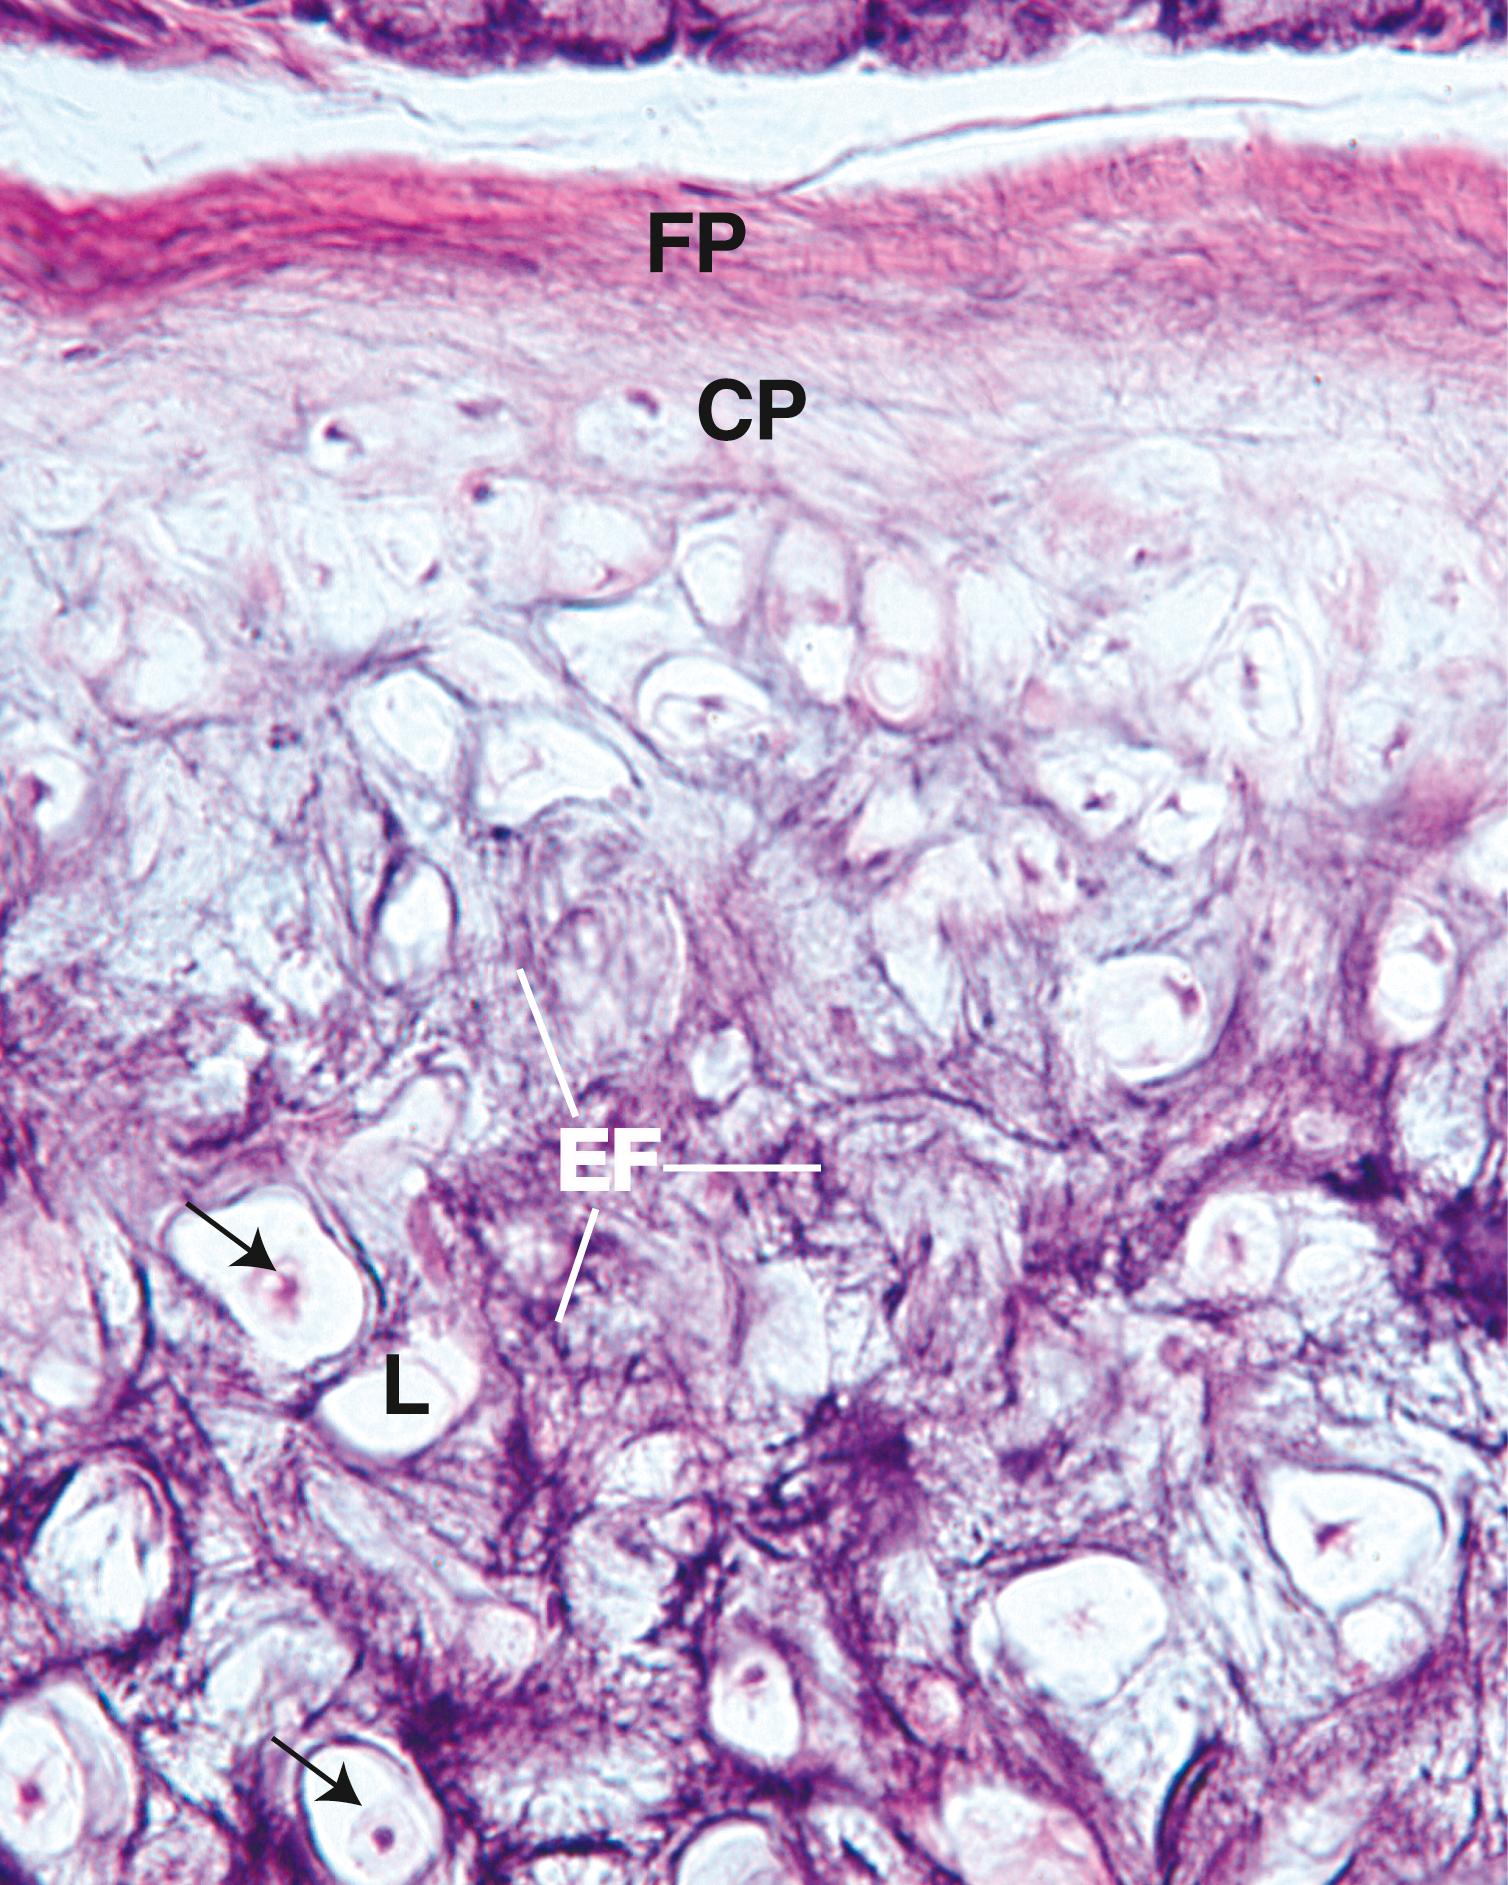 Fig. 7.6, Medium magnification of a light micrograph of elastic cartilage. Note the fibrous (FP) and the cellular (CP) perichondrium and the differences in their cell population. The lacunae (L) of the cartilage have chondrocytes (arrows) that shrunk during preparation so they do not occupy the entire lacuna as they would in living cartilage. Numerous elastic fibers (EF) are embedded in the gelatinous matrix. (x270)